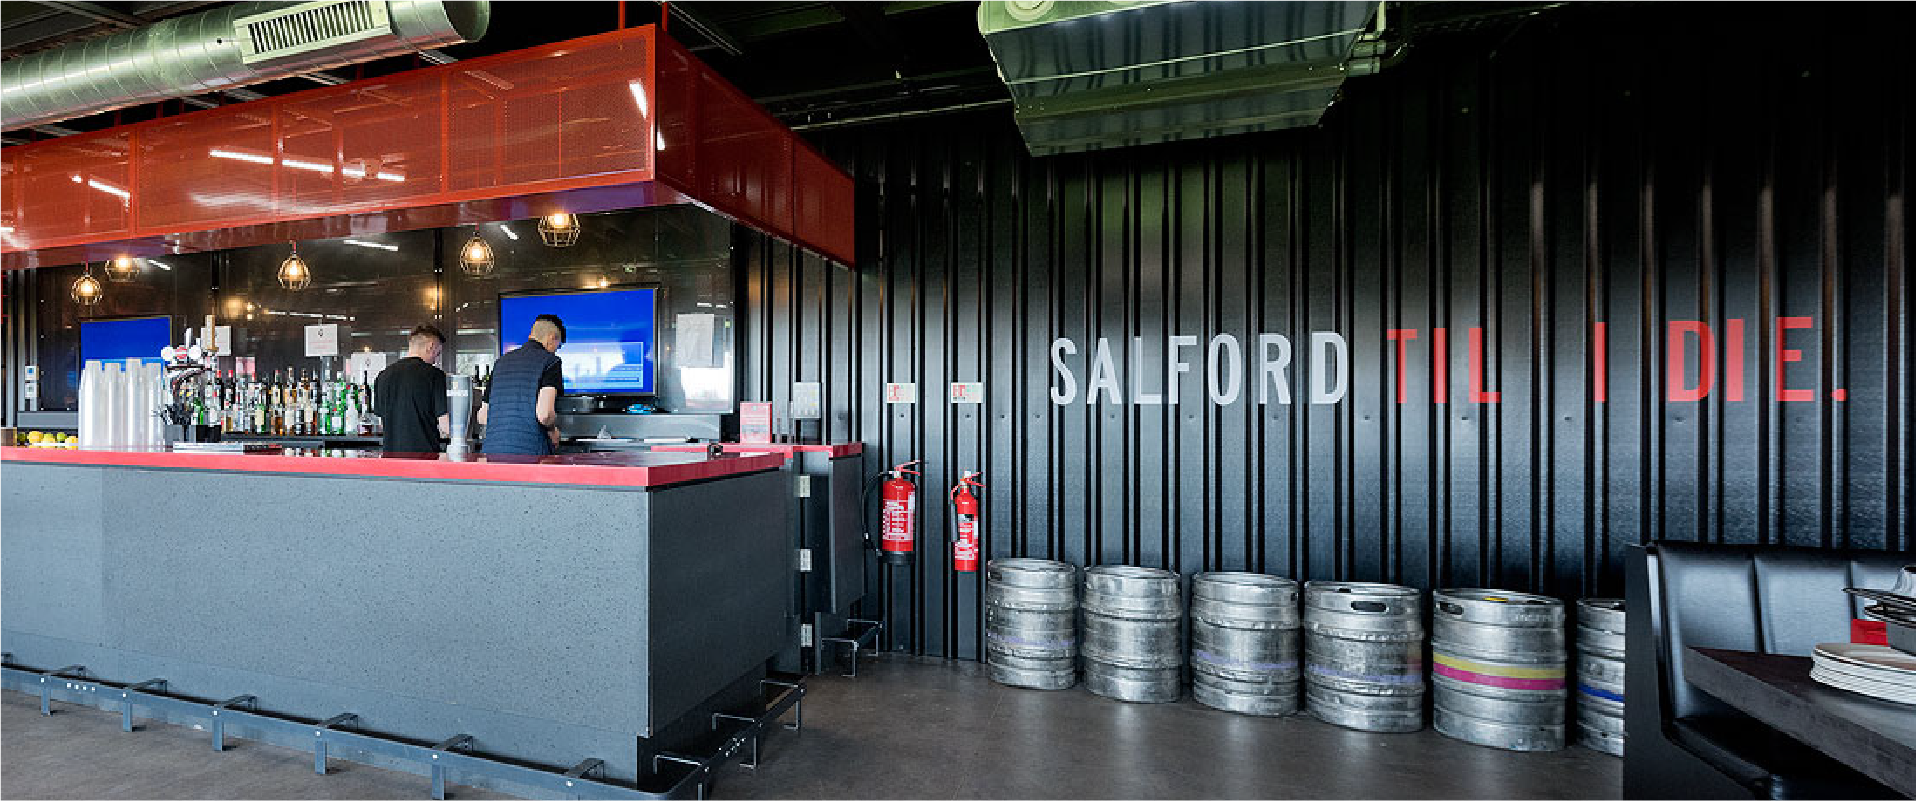 Astra Signs - Case Study -Salford City